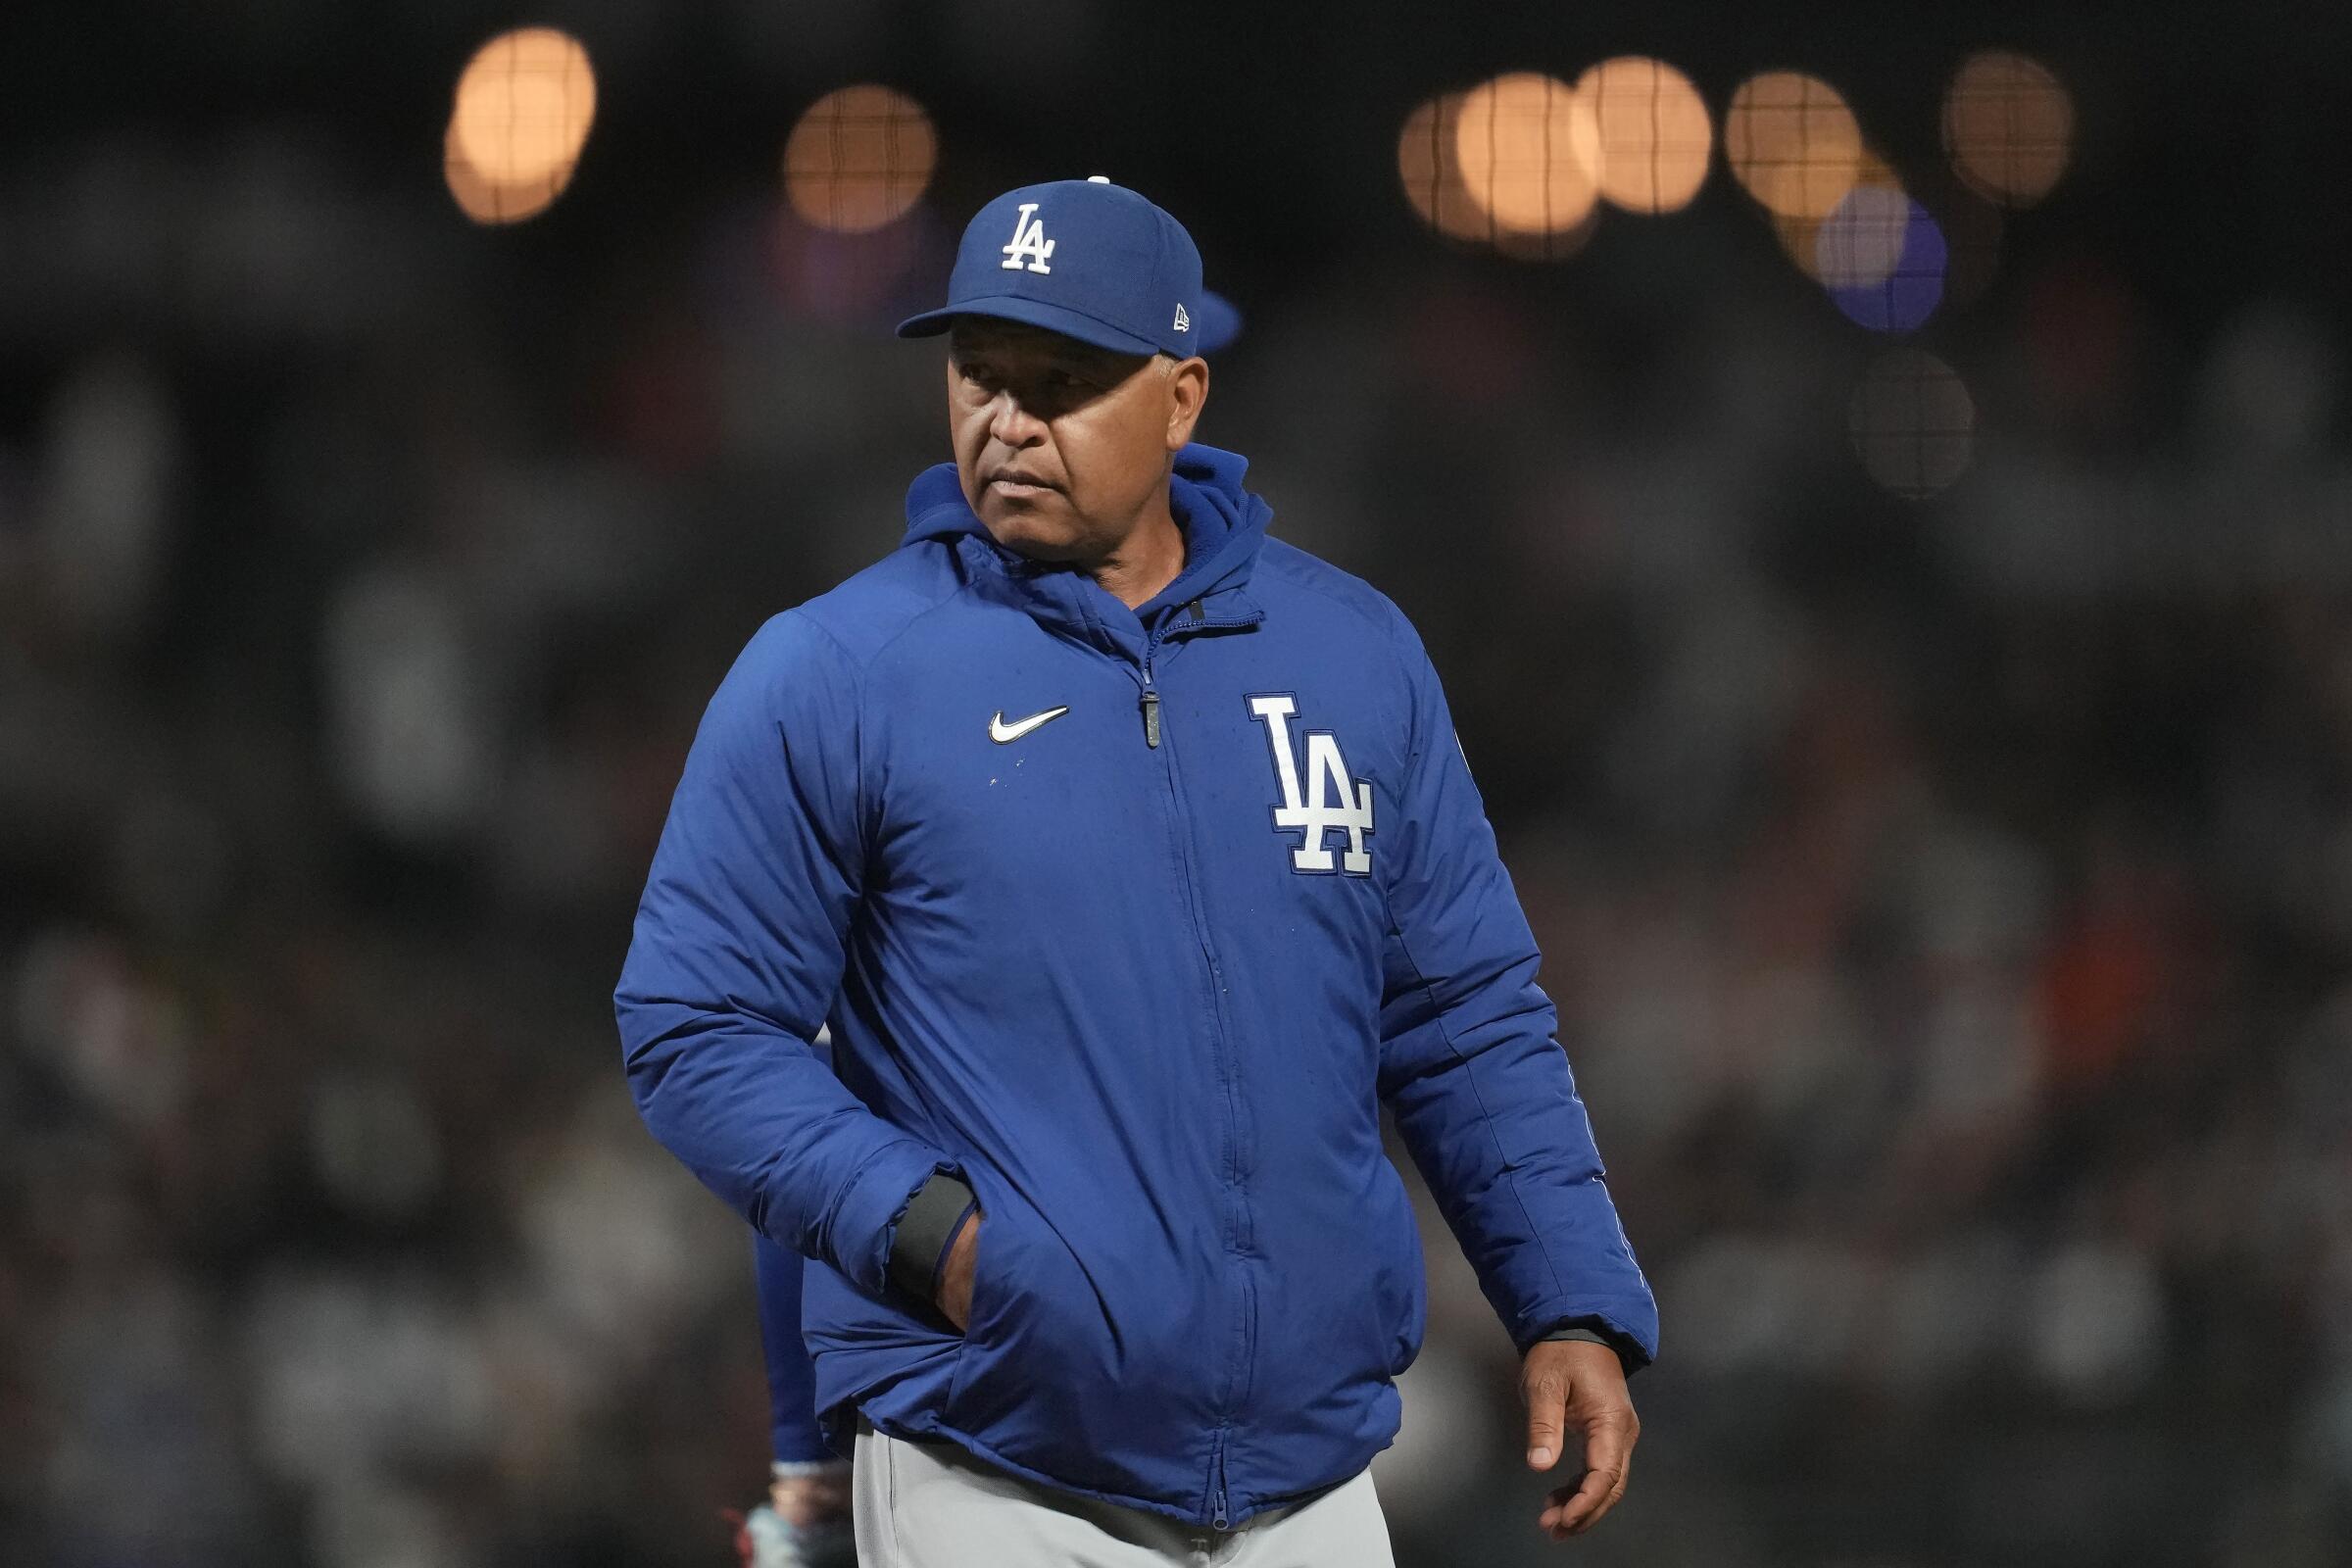 Los Angeles Dodgers manager Dave Roberts walks to the dugout after making a pitching change.